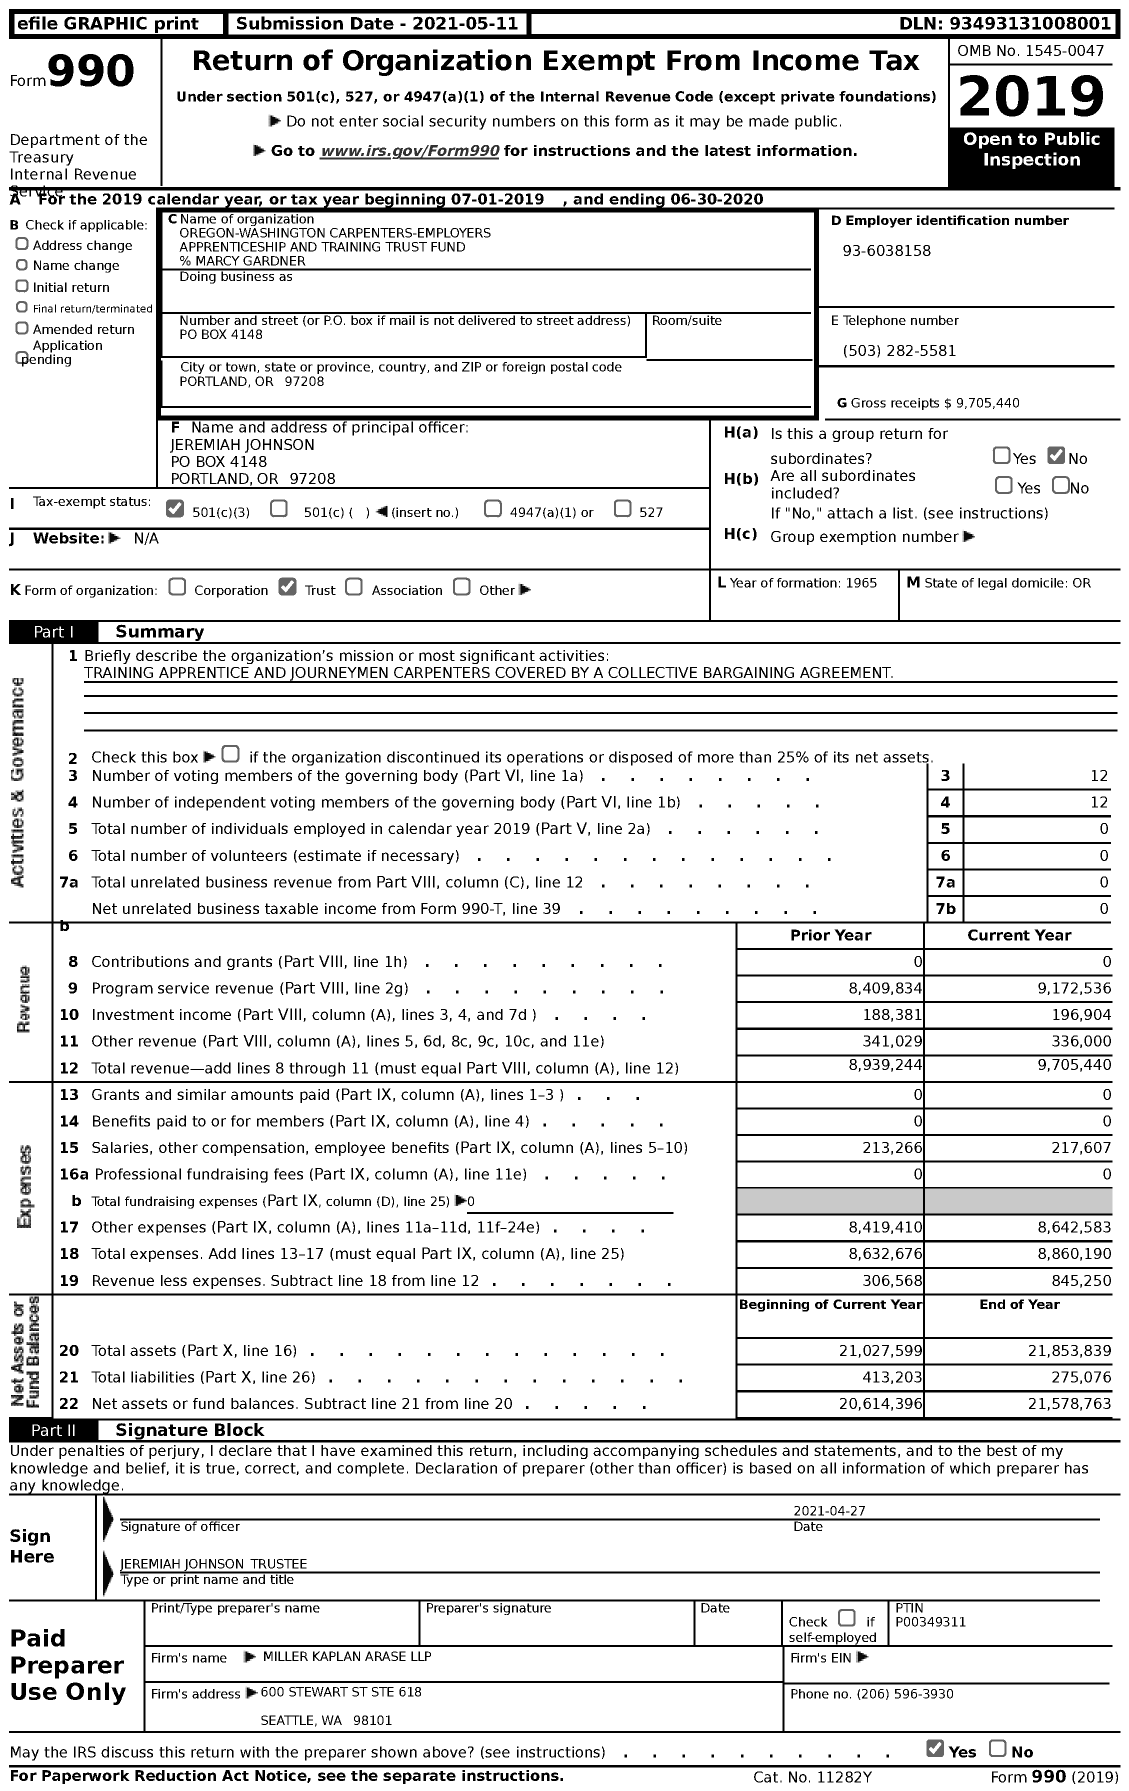 Image of first page of 2019 Form 990 for Oregon-Washington Carpenters-Employers Apprenticeship Training Trust Fund